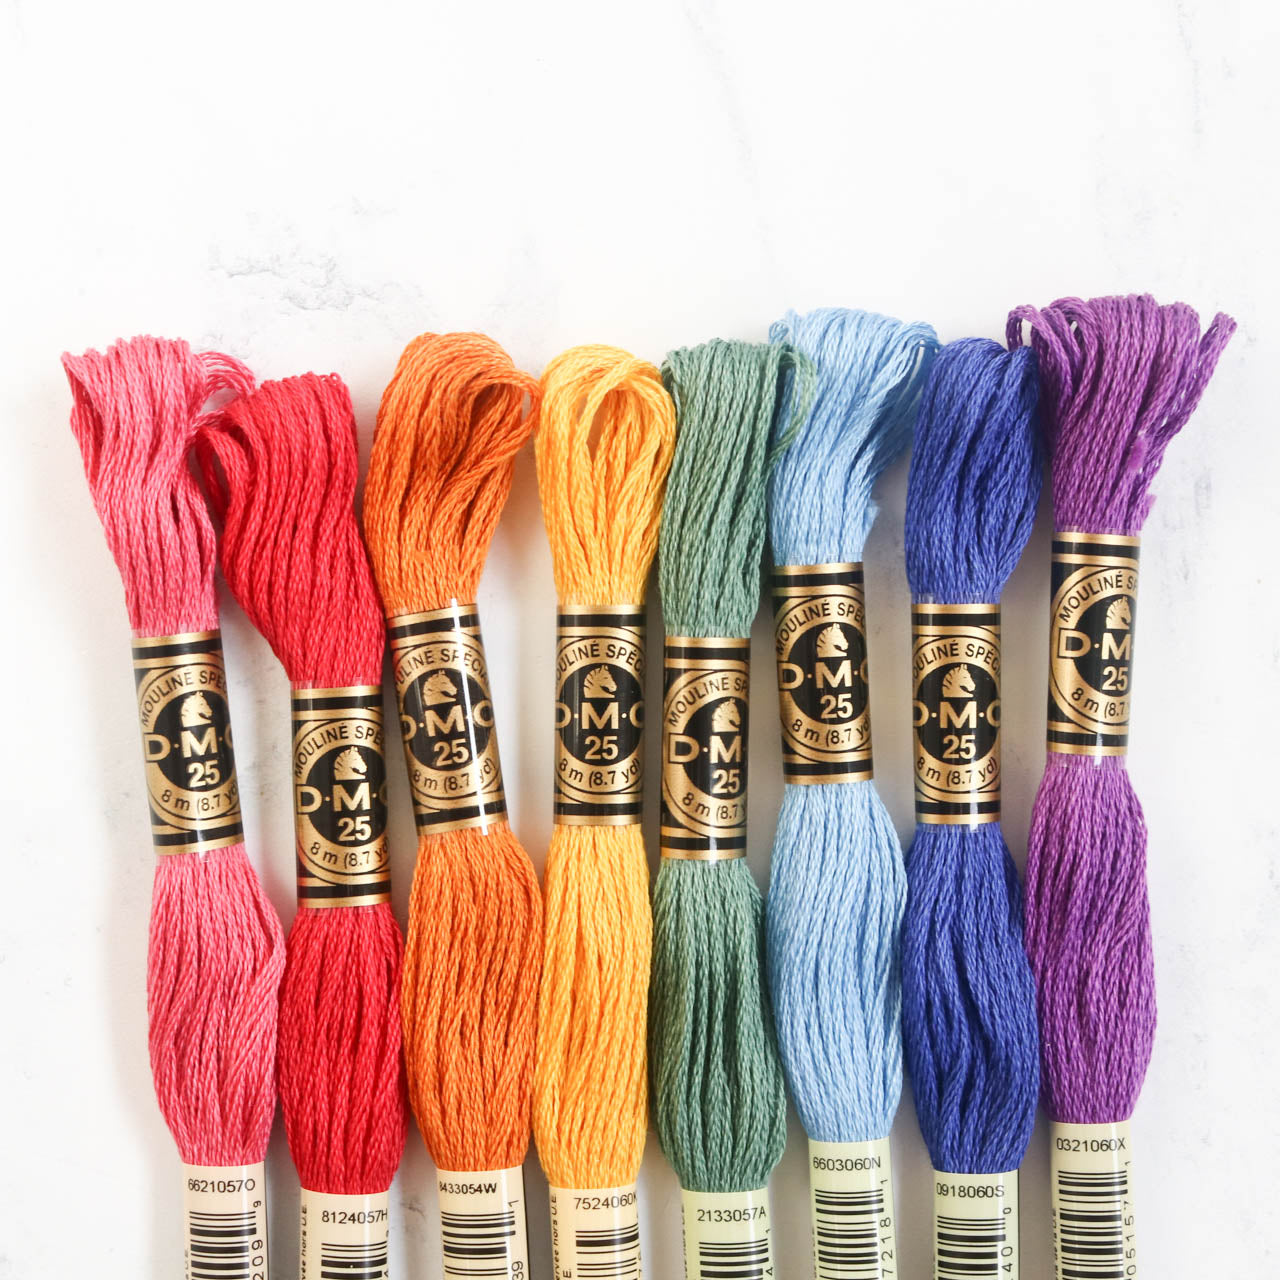 Embroidery Thread Color Schemes For Every Needlework Project